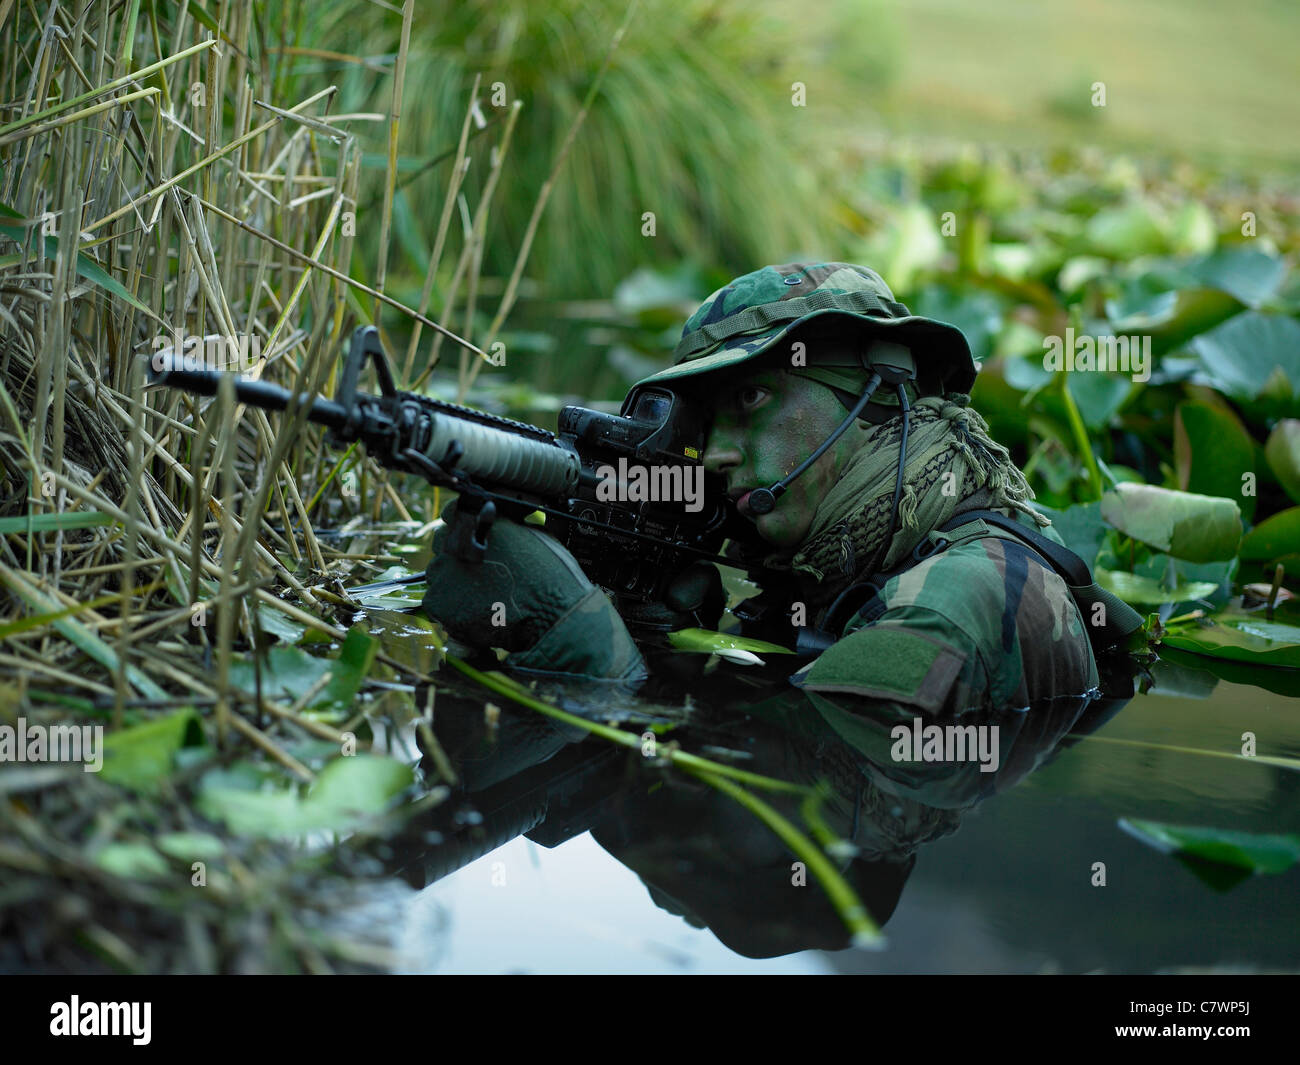 U.S. Navy SEAL crosses through a stream during combat operations. Stock Photo